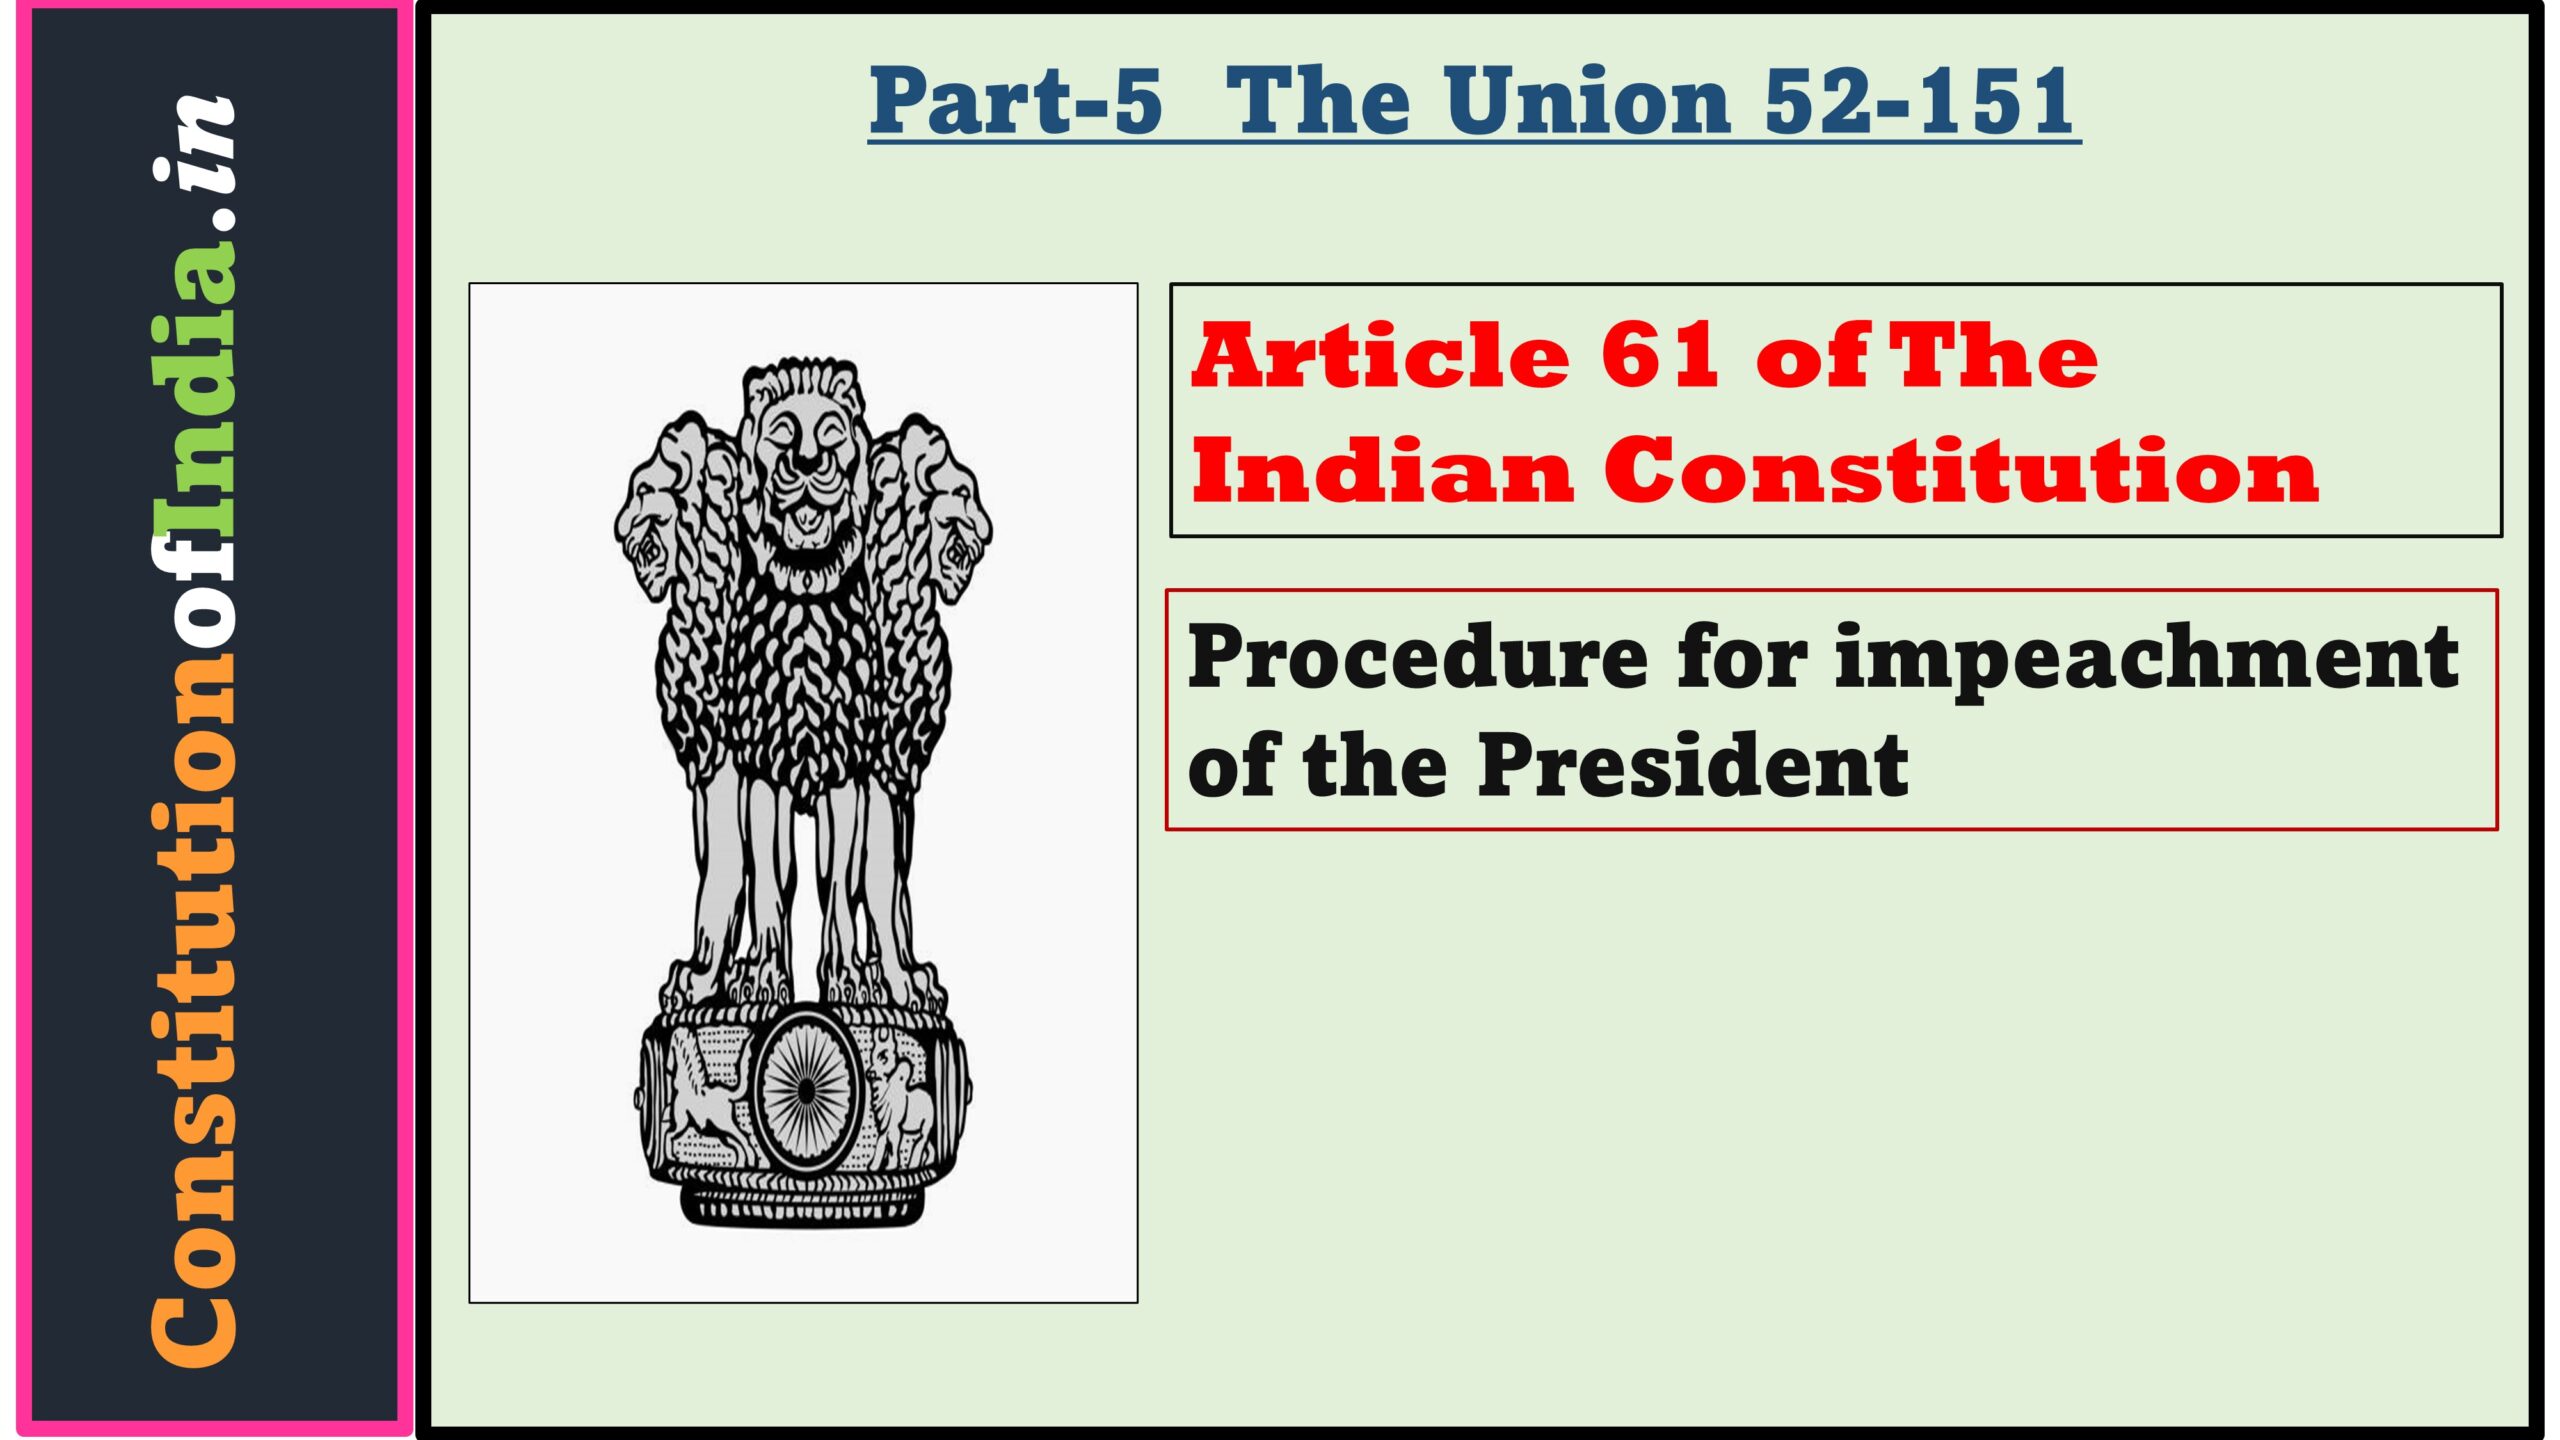 Article 61 of Indian Constitution: Procedure for impeachment of the President .